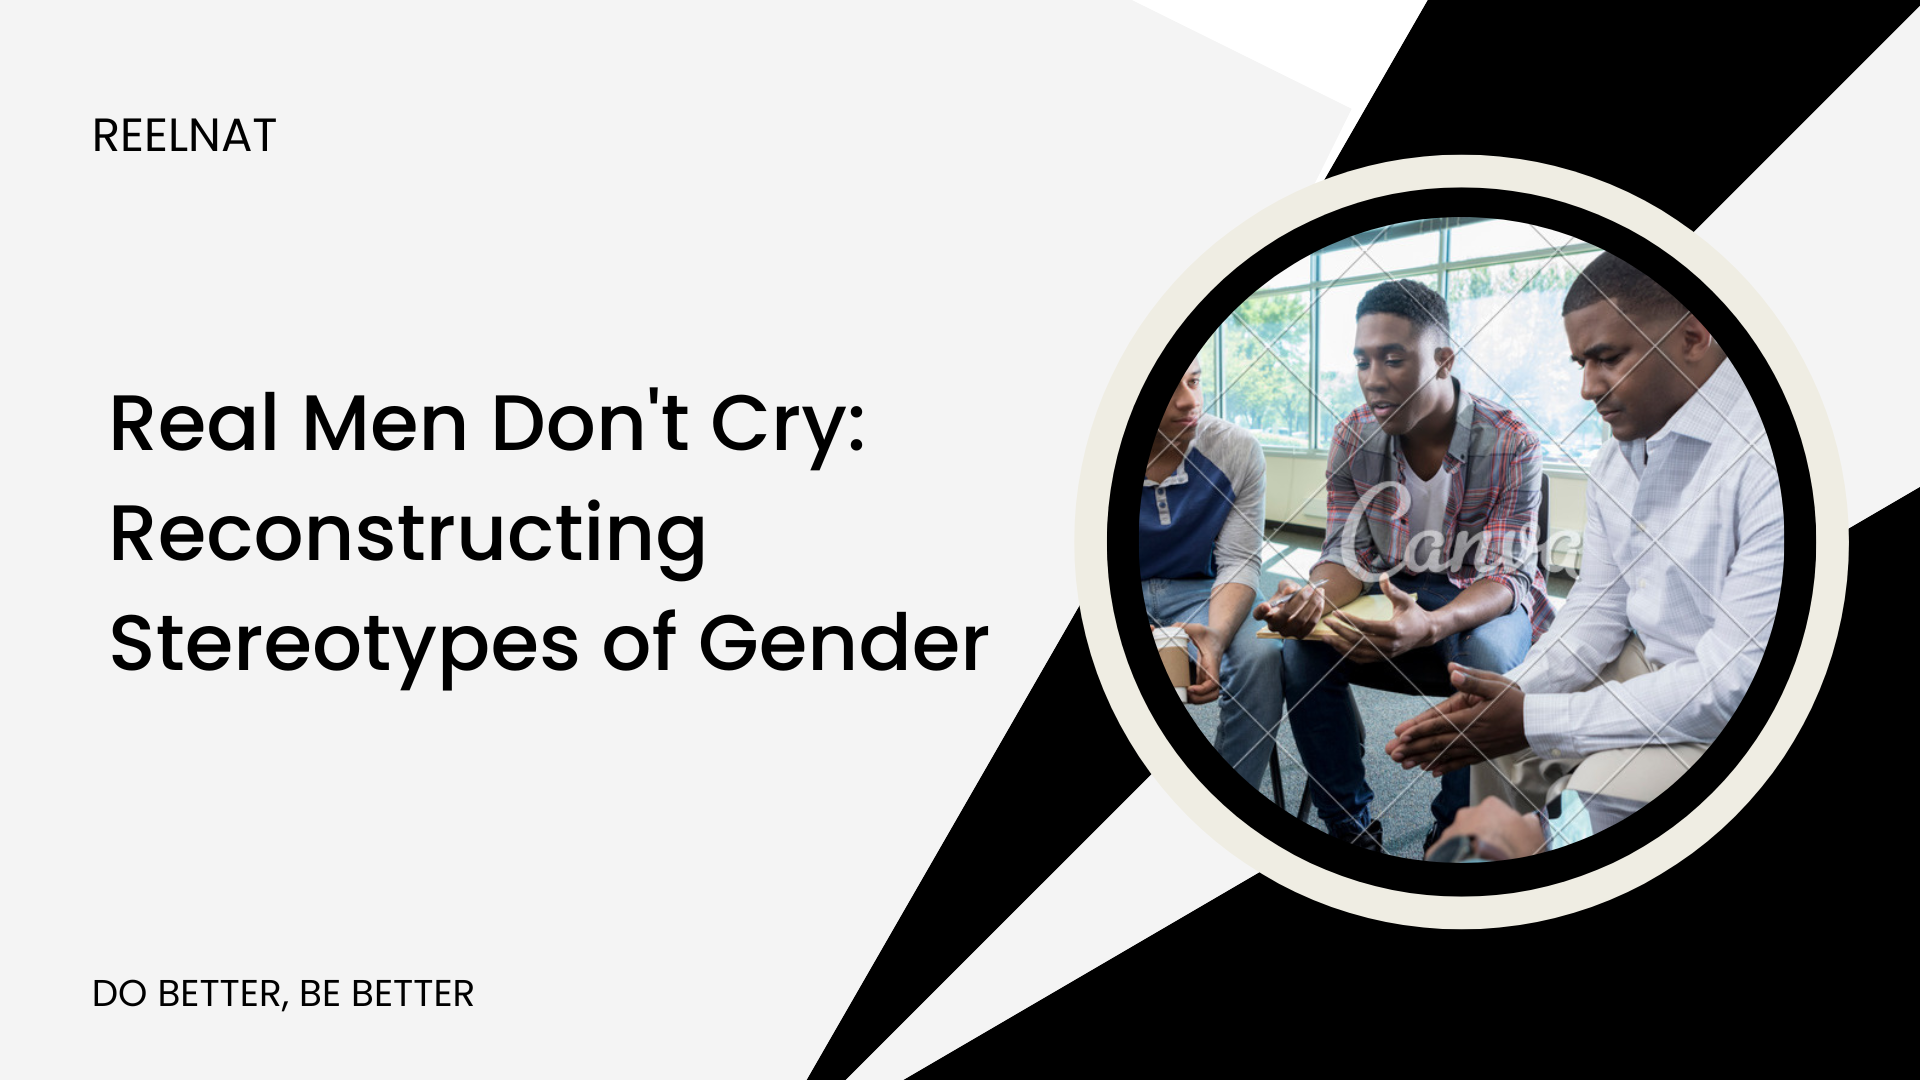 Real Men Don’t Cry: Reconstructing Stereotypes of Gender